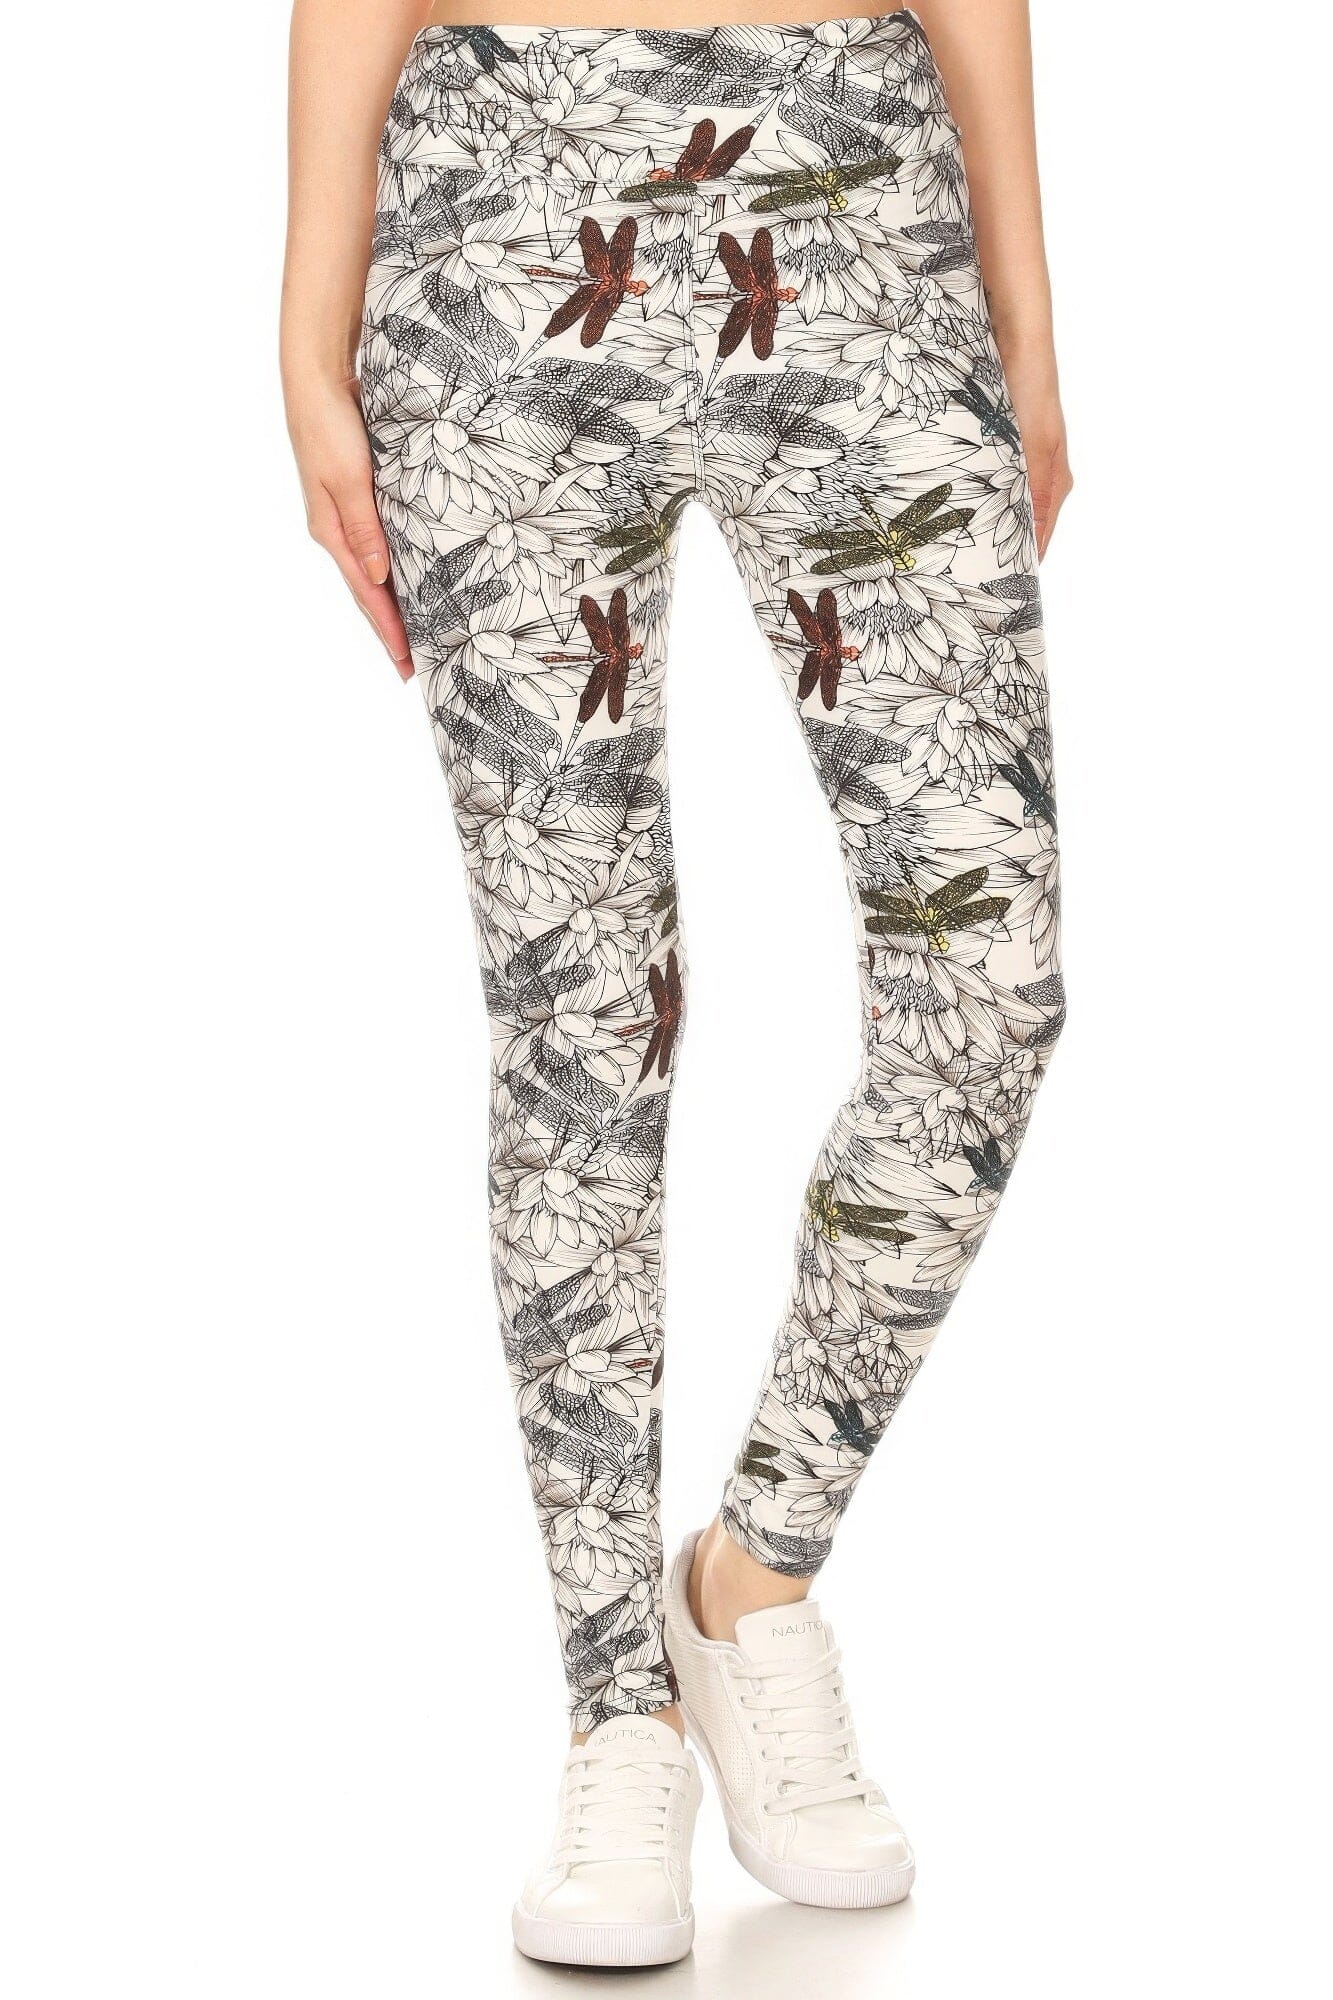 Yoga Style Banded Lined Dragonfly Print In A Slim Fitting Style With A Banded High Waist Full Length Leggings Pants jehouze 